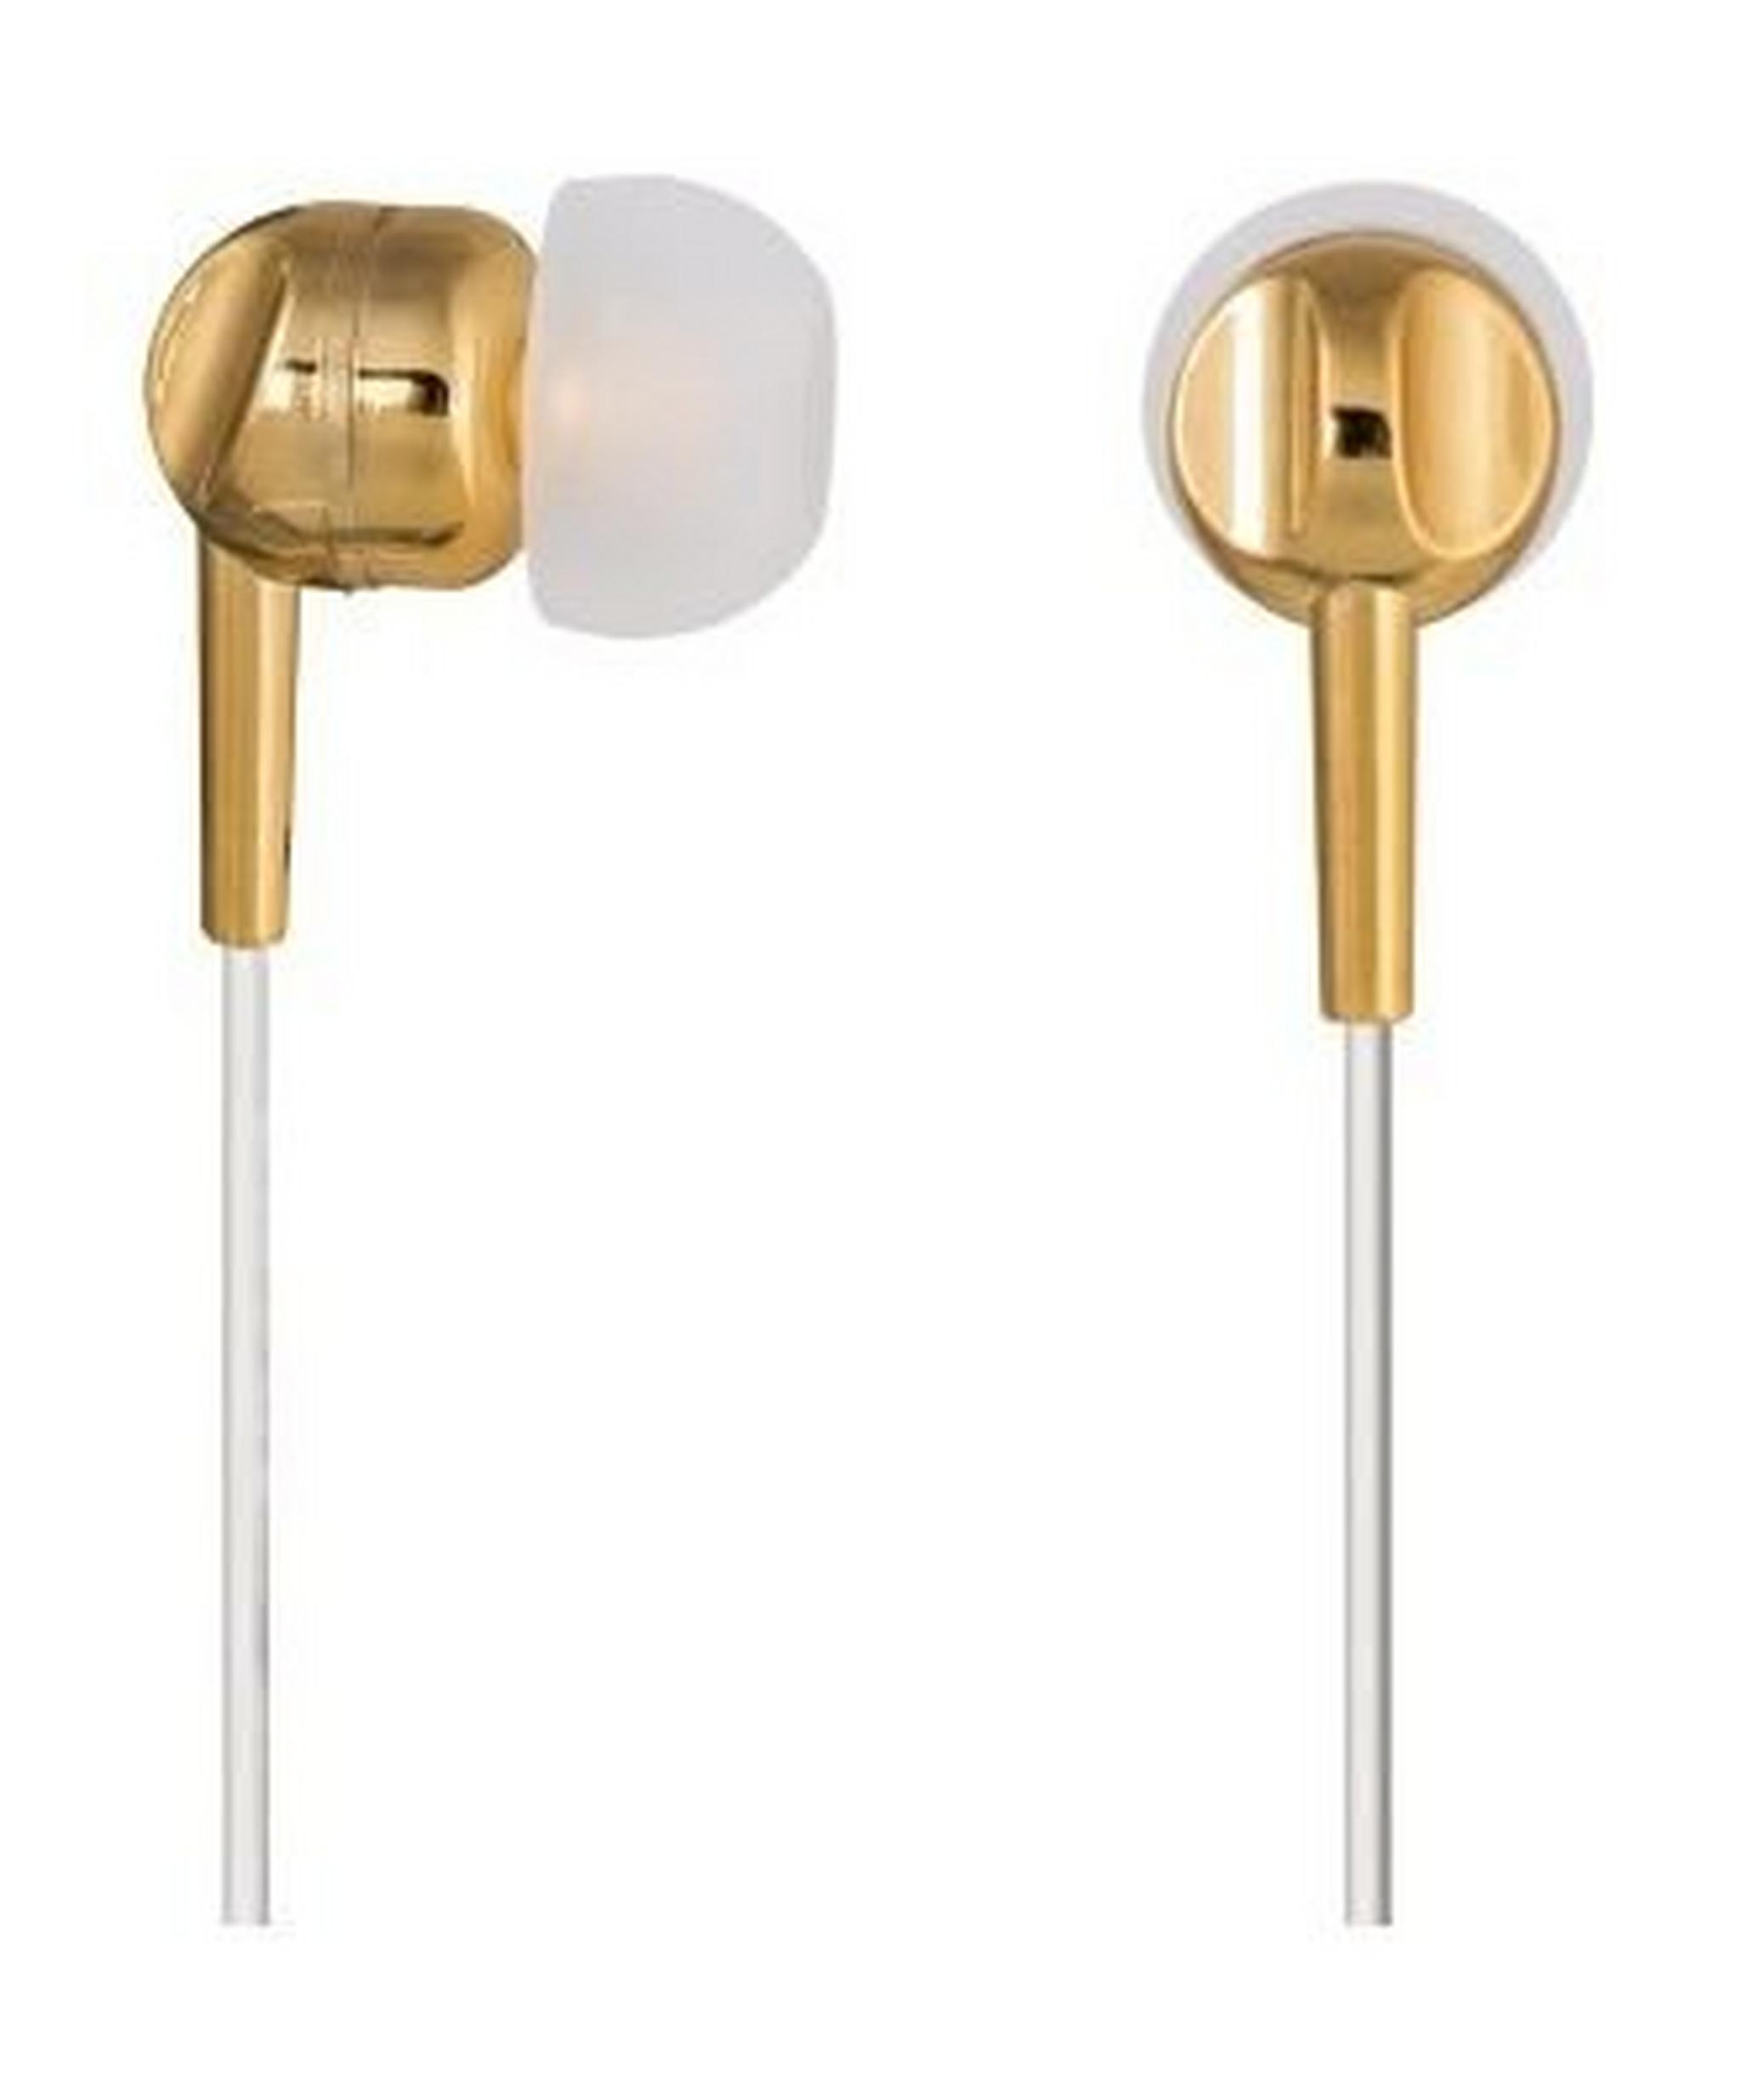 Thomson In-Ear Earphones with Microphone (EAR3005GD) – Gold